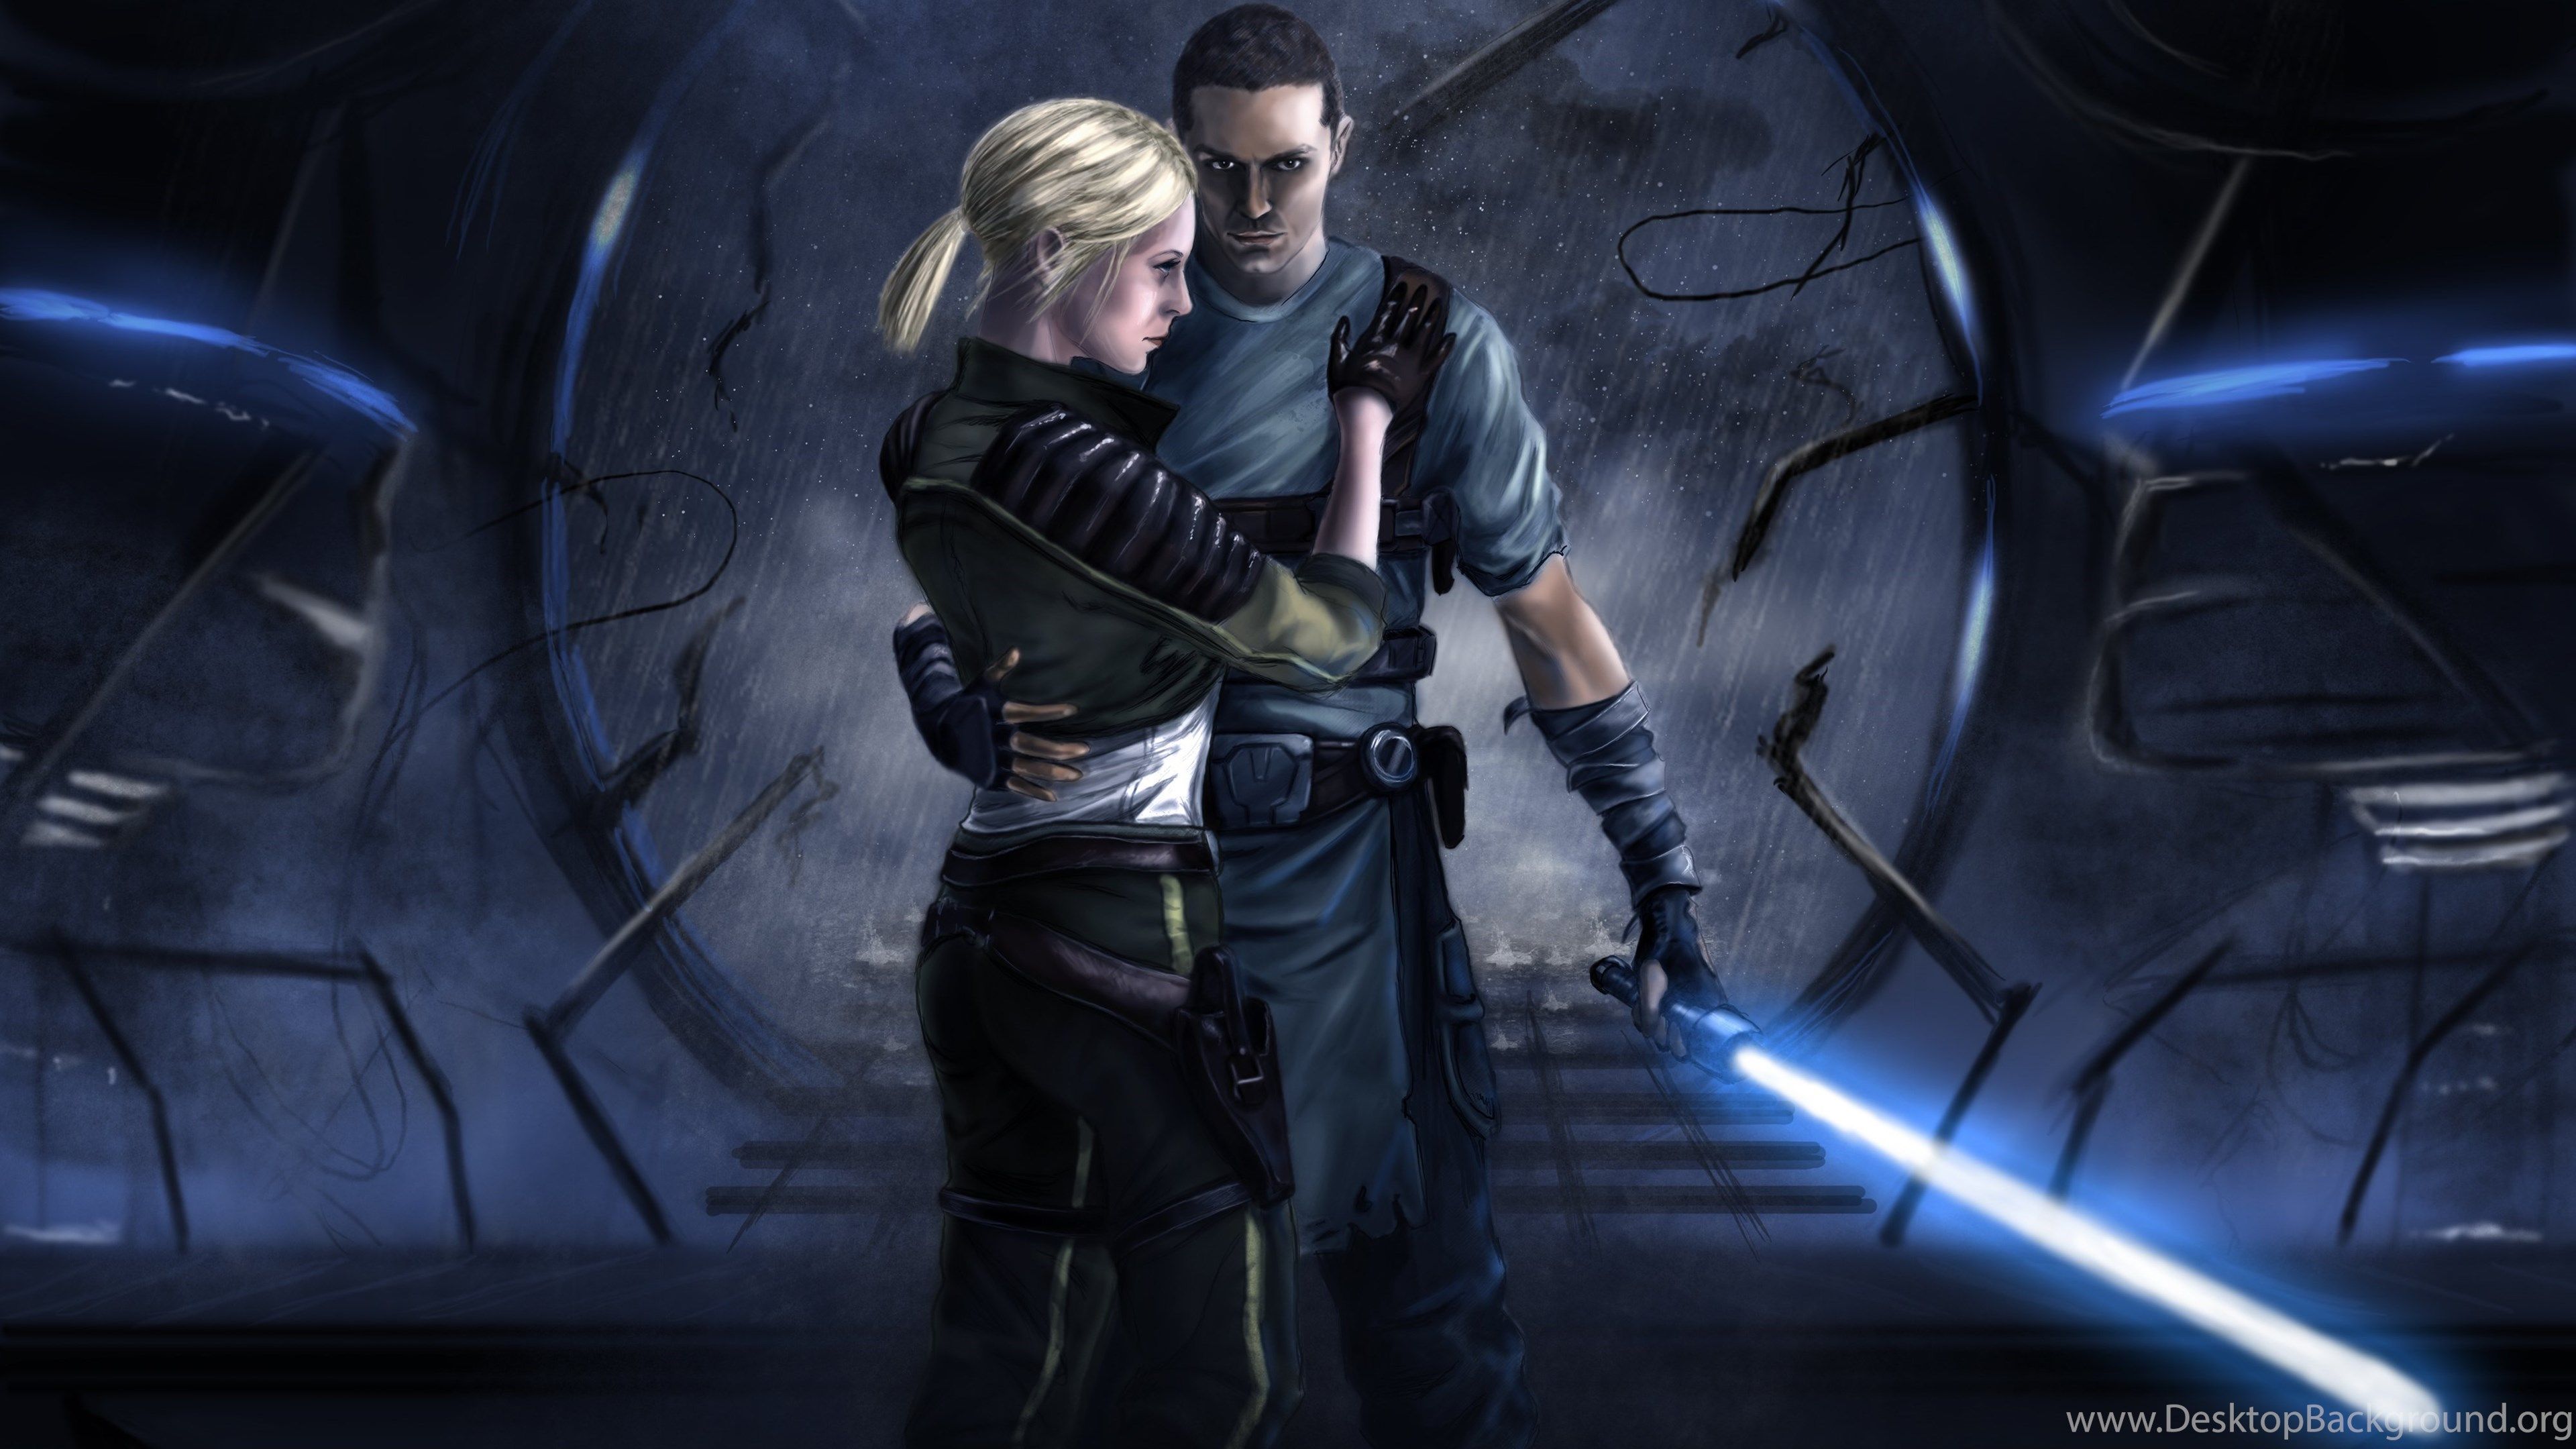 STAR WARS Force Unleashed Sci fi Futuristic Action Fighting. Desktop Background